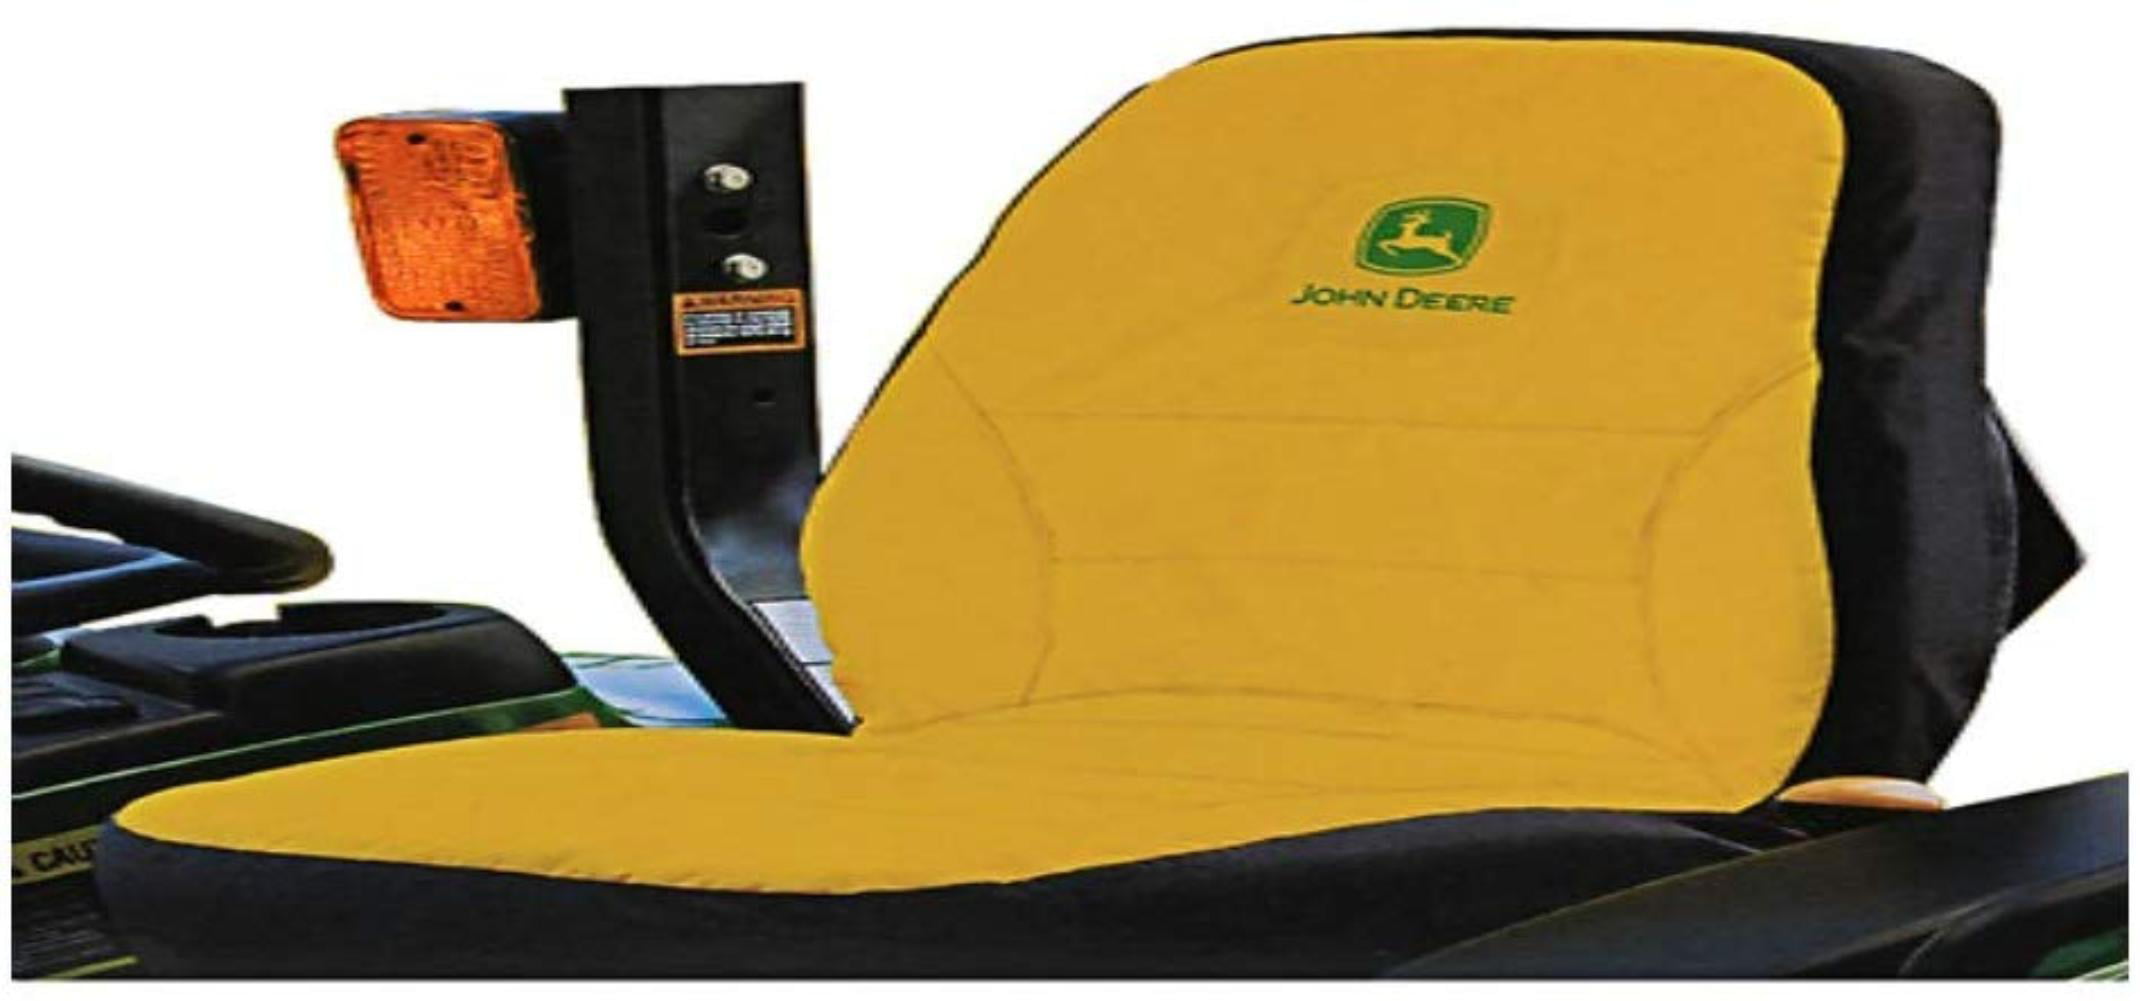 Large John Deere 18" Compact Utility Tractor Seat Cover #LP95233